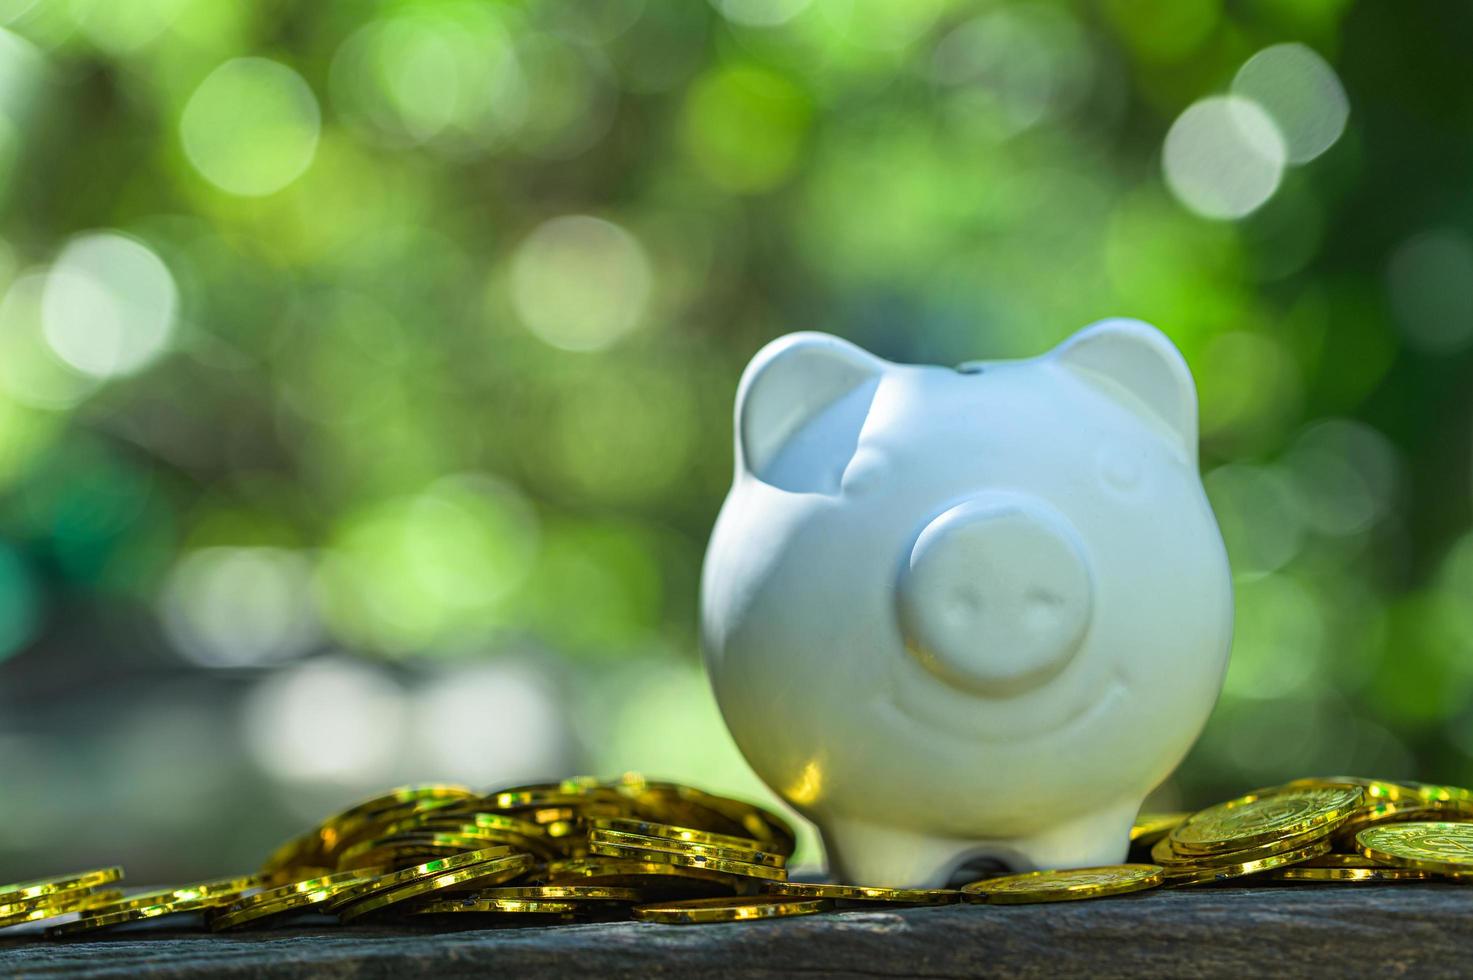 piggy-bank-with-gold-coins-on-table-outside-free-photo